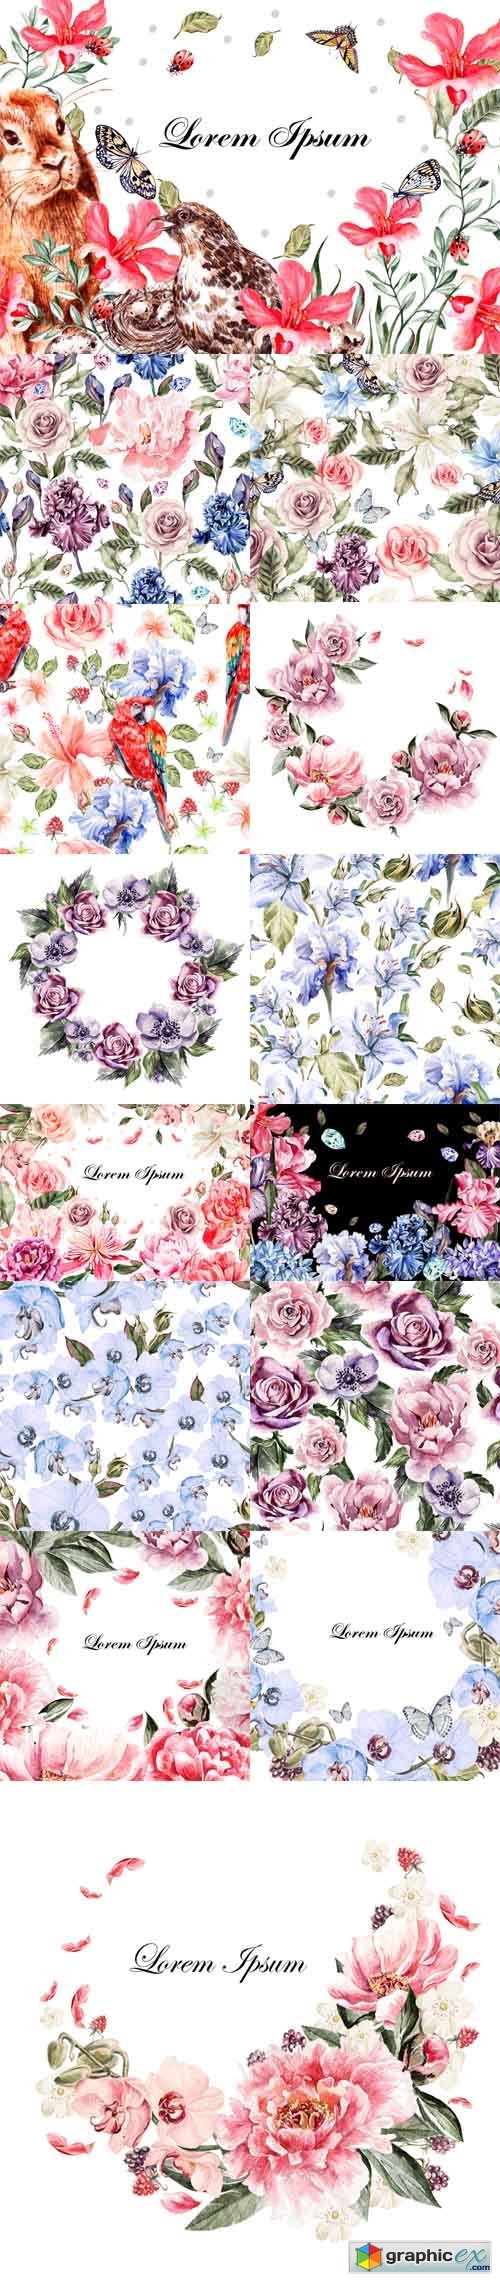 Photo Set - Beautiful watercolor cards and patterns with peony flowers, orchid roses and plants